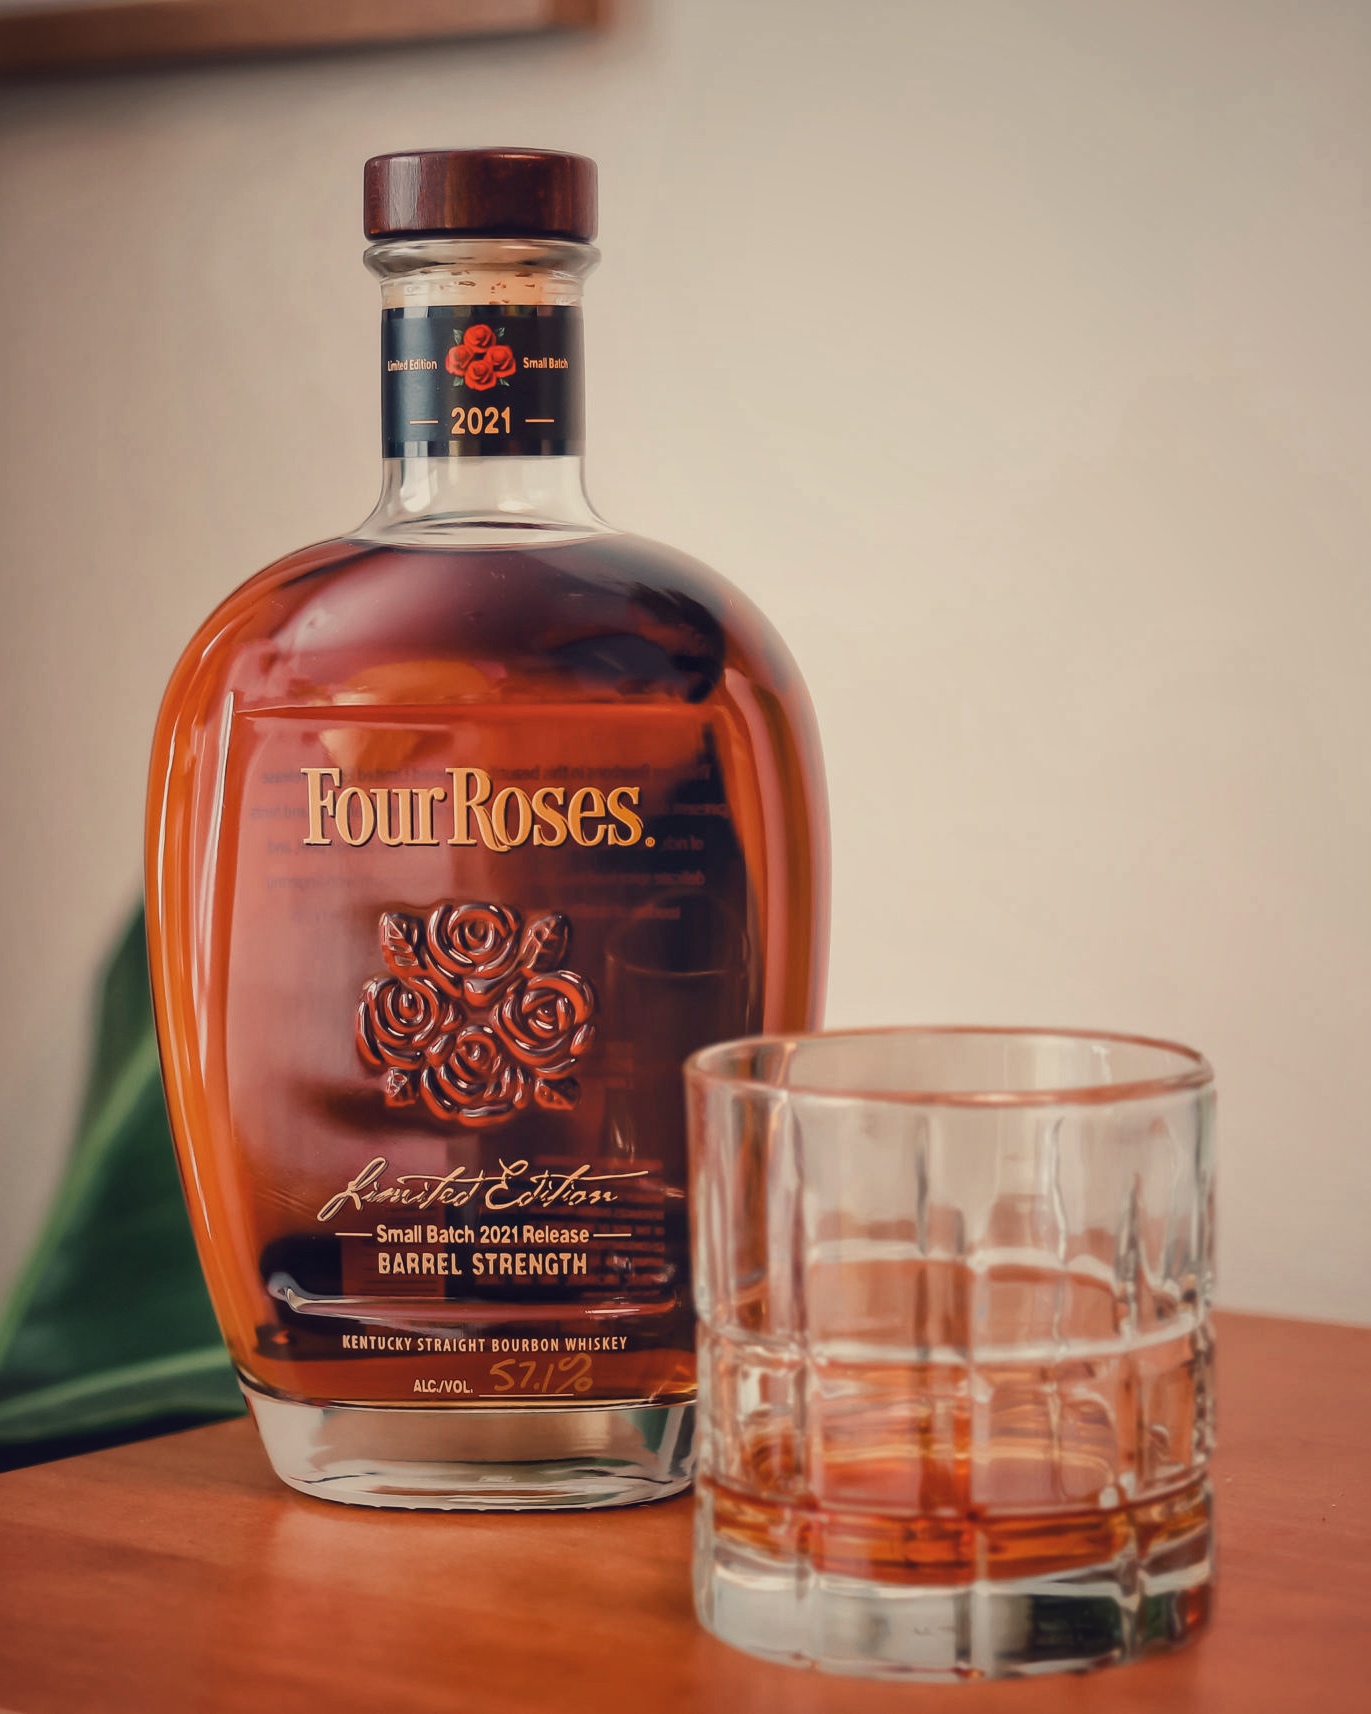 150: Celebrating a Milestone with Four Roses Limited Edition Bourbon